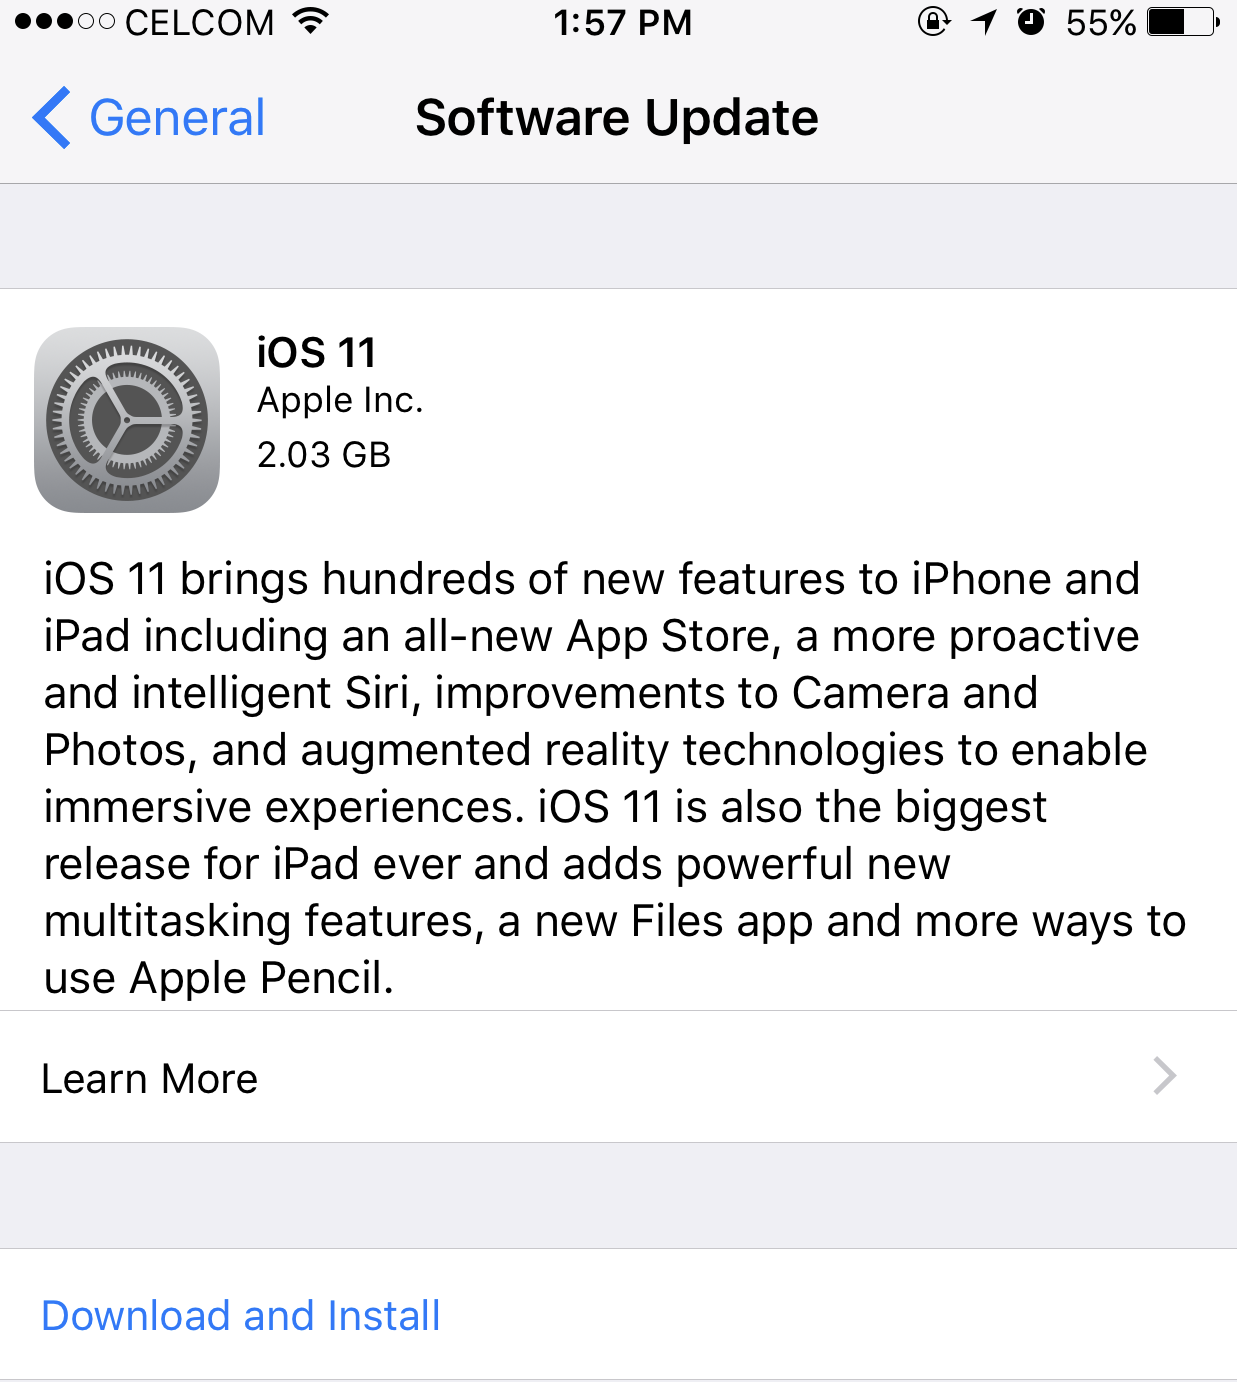 How to Update iPhone iOS11 using iTunes